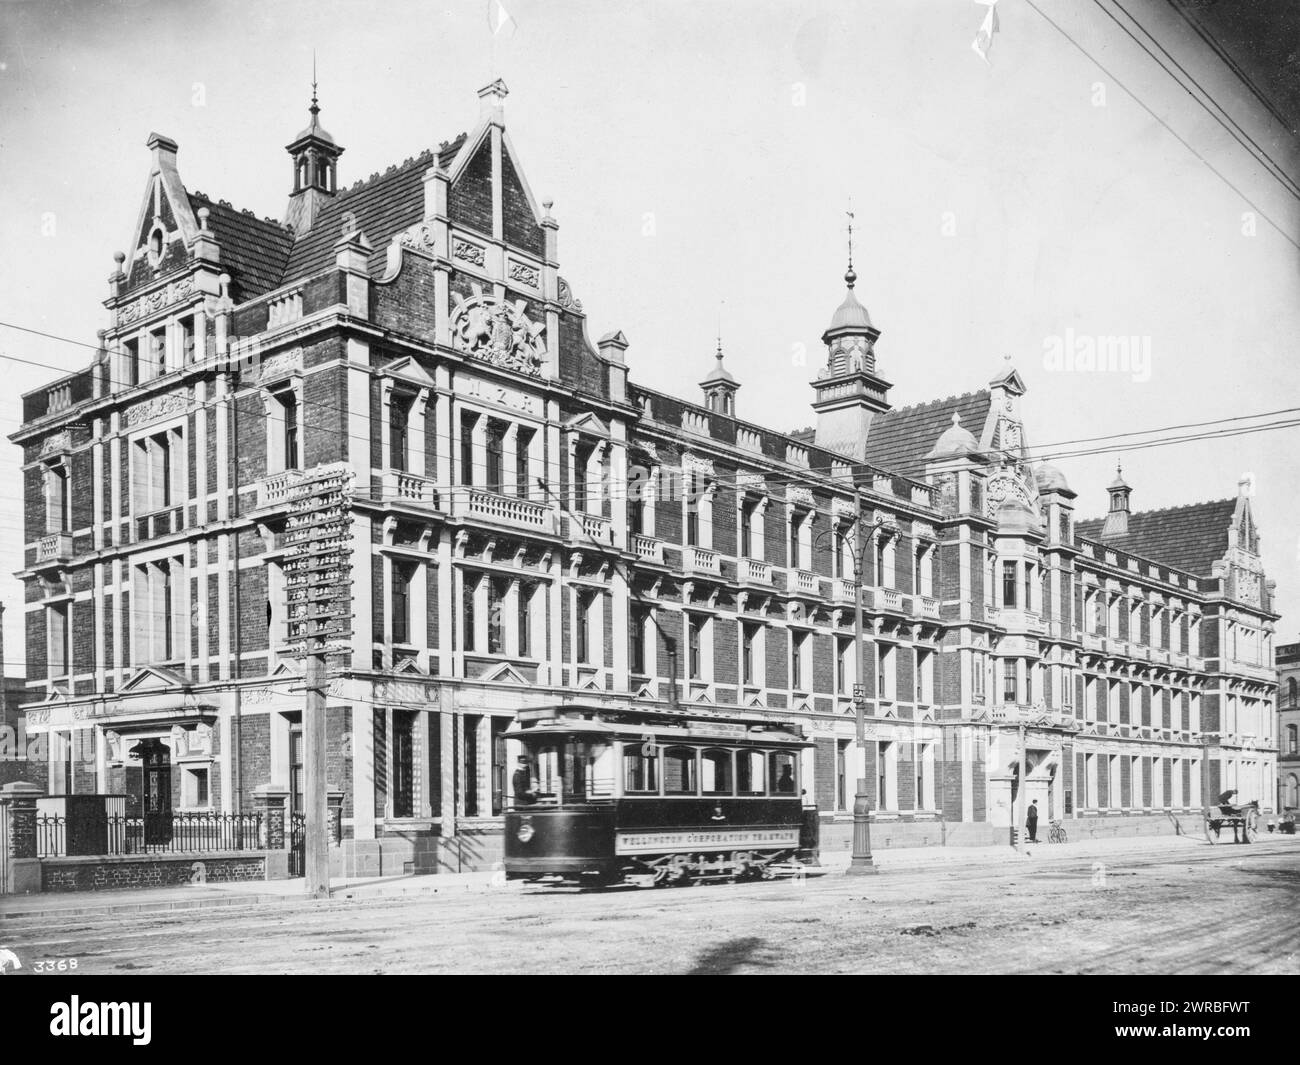 Government railway building in Wellington, New Zealand, between 1900 and 1920, Government facilities, New Zealand, Wellington, 1900-1920, Photographic prints, 1900-1920., Photographic prints, 1900-1920, 1 photographic print Stock Photo